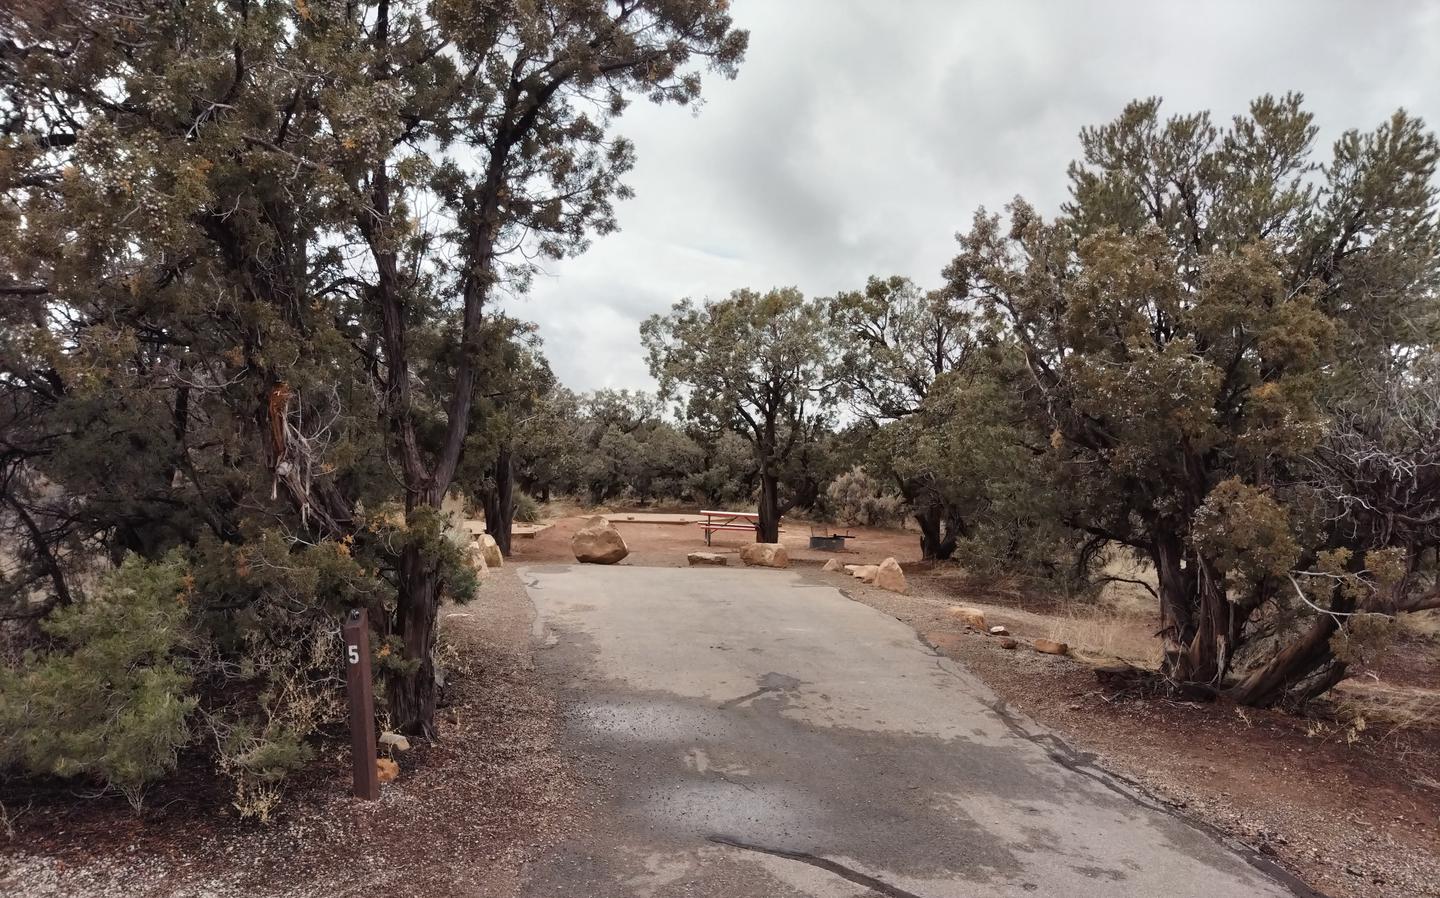 Parking space for Site 5, surrounded by trees.Site 5 has two tent pads, a picnic table and a metal fire ring. The site is surrounded by a pinon-juniper forest.